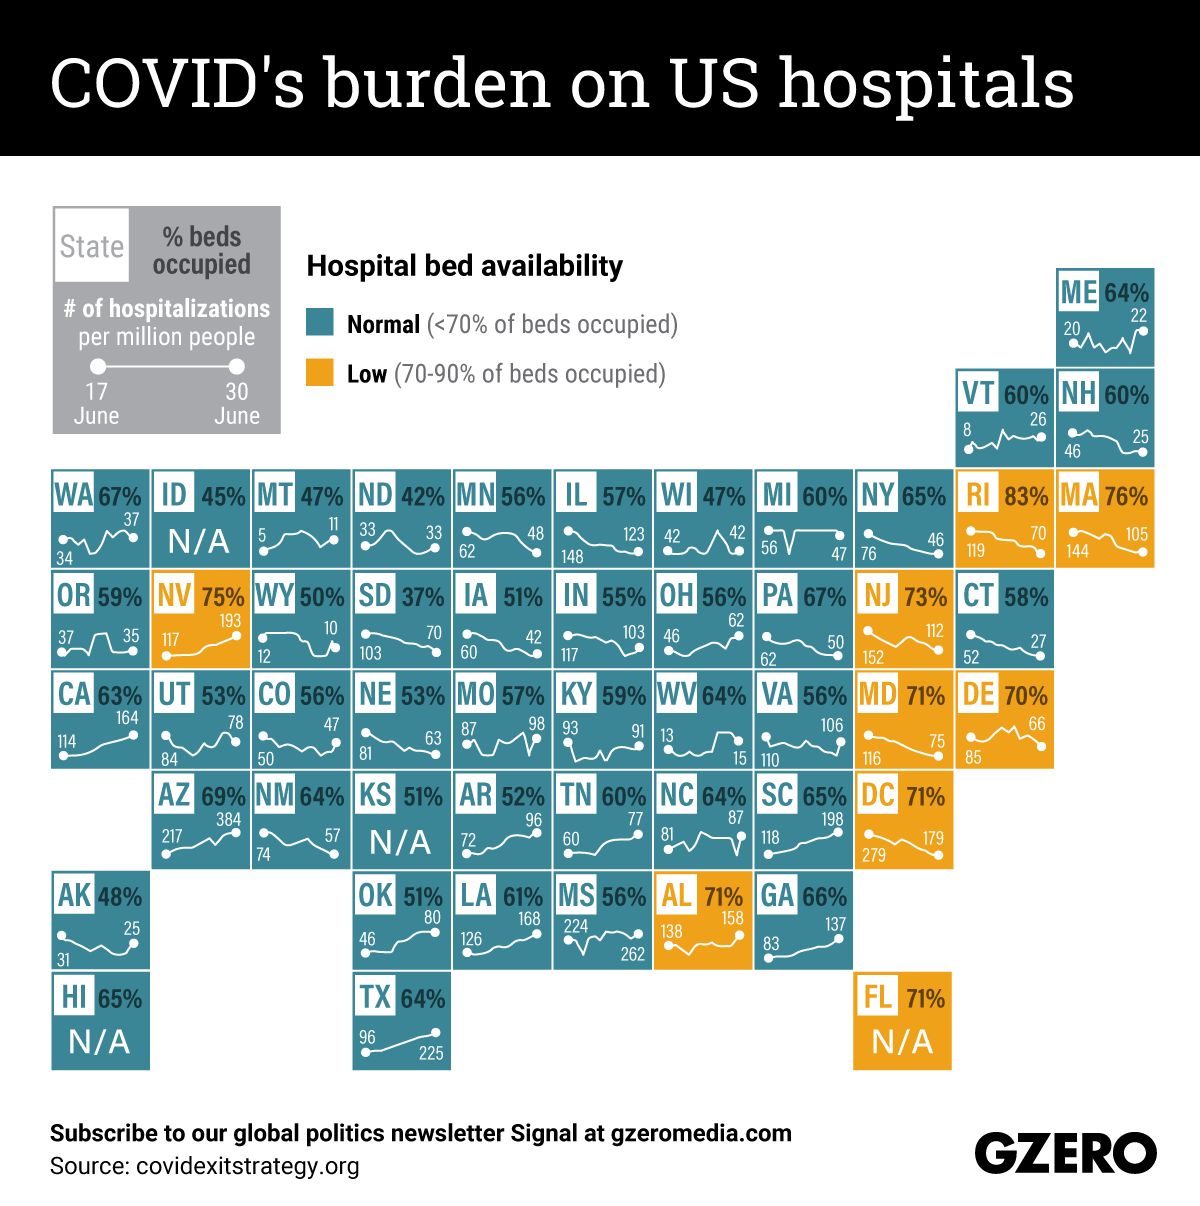 The Graphic Truth: COVID's burden on US hospitals